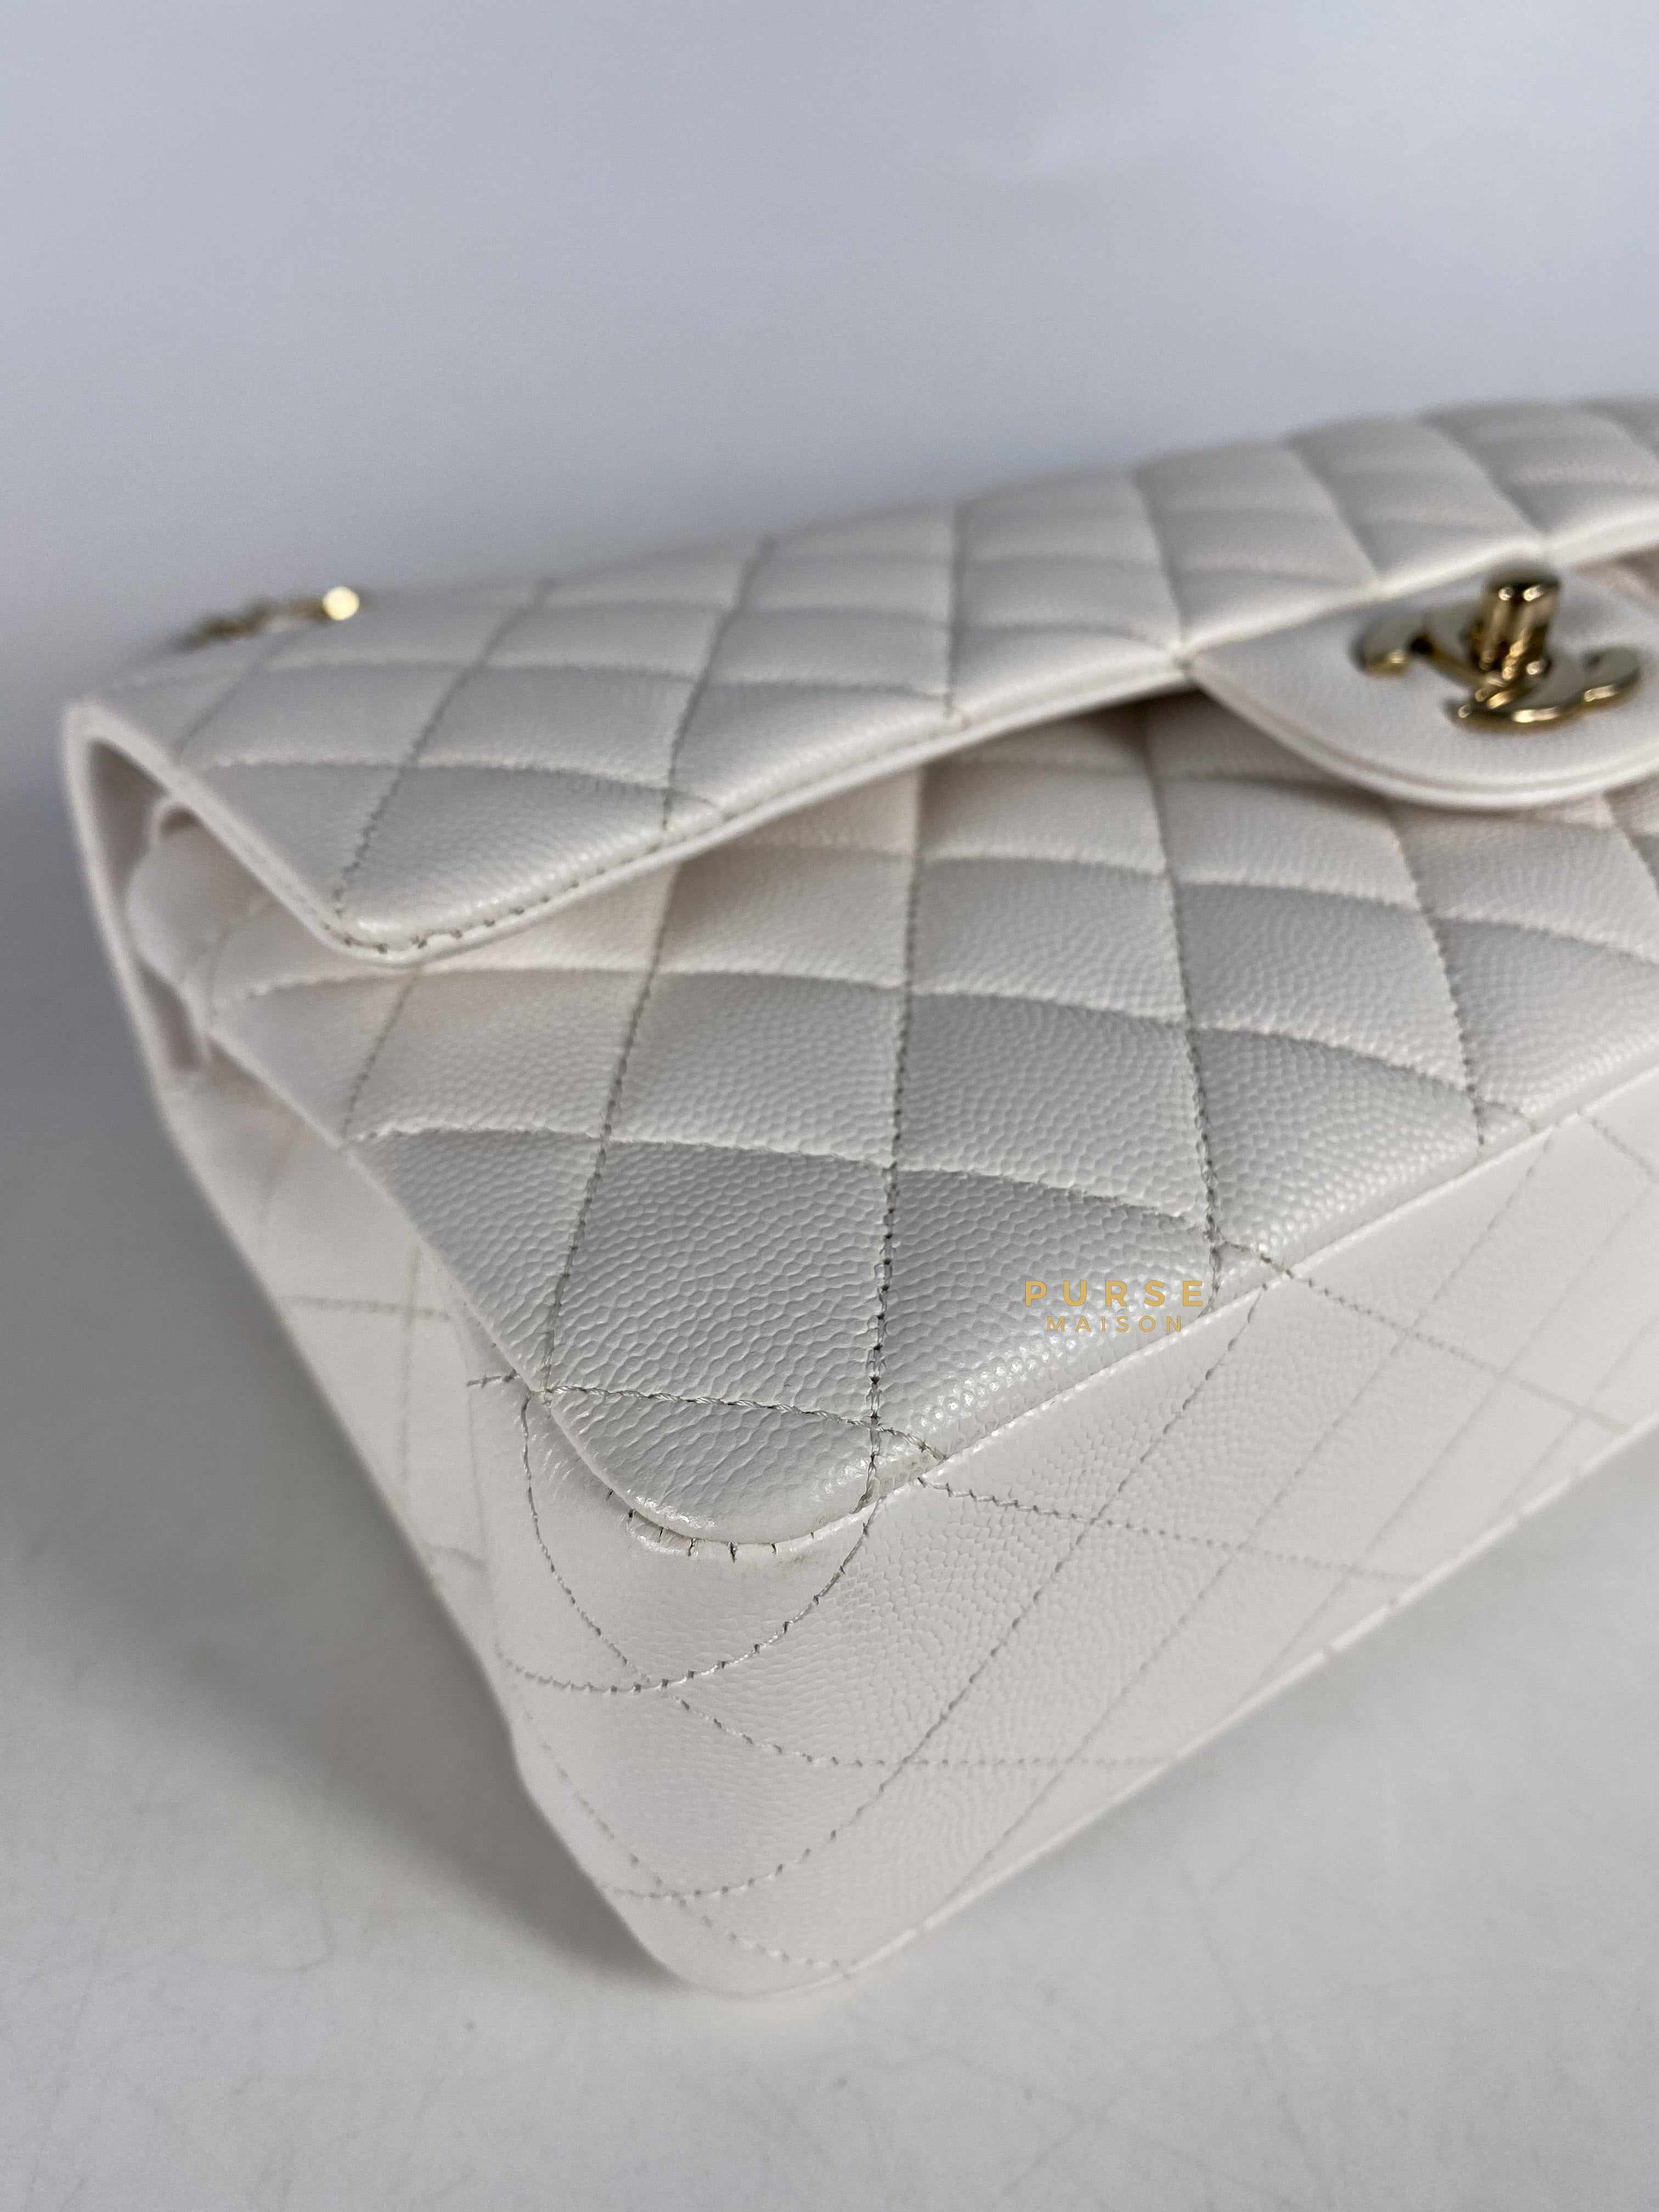 Chanel Medium Classic Double Flap 23C White Caviar Leather and Light Gold Hardware (Microchip) | Purse Maison Luxury Bags Shop